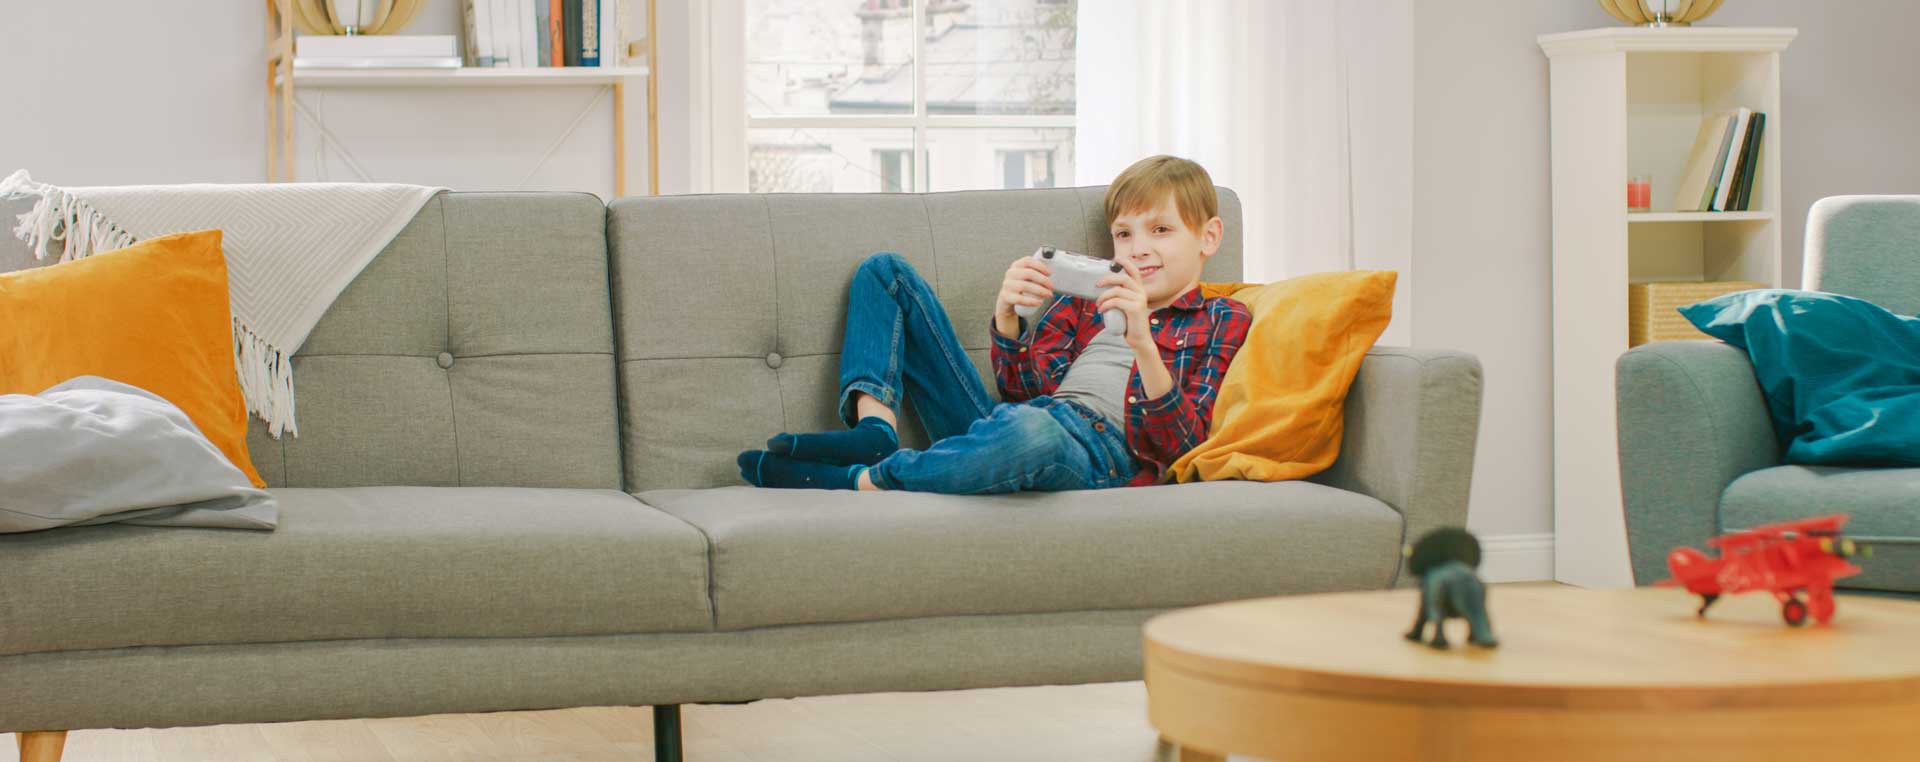 A boy sits on a sofa with his feet up, playing Playstation